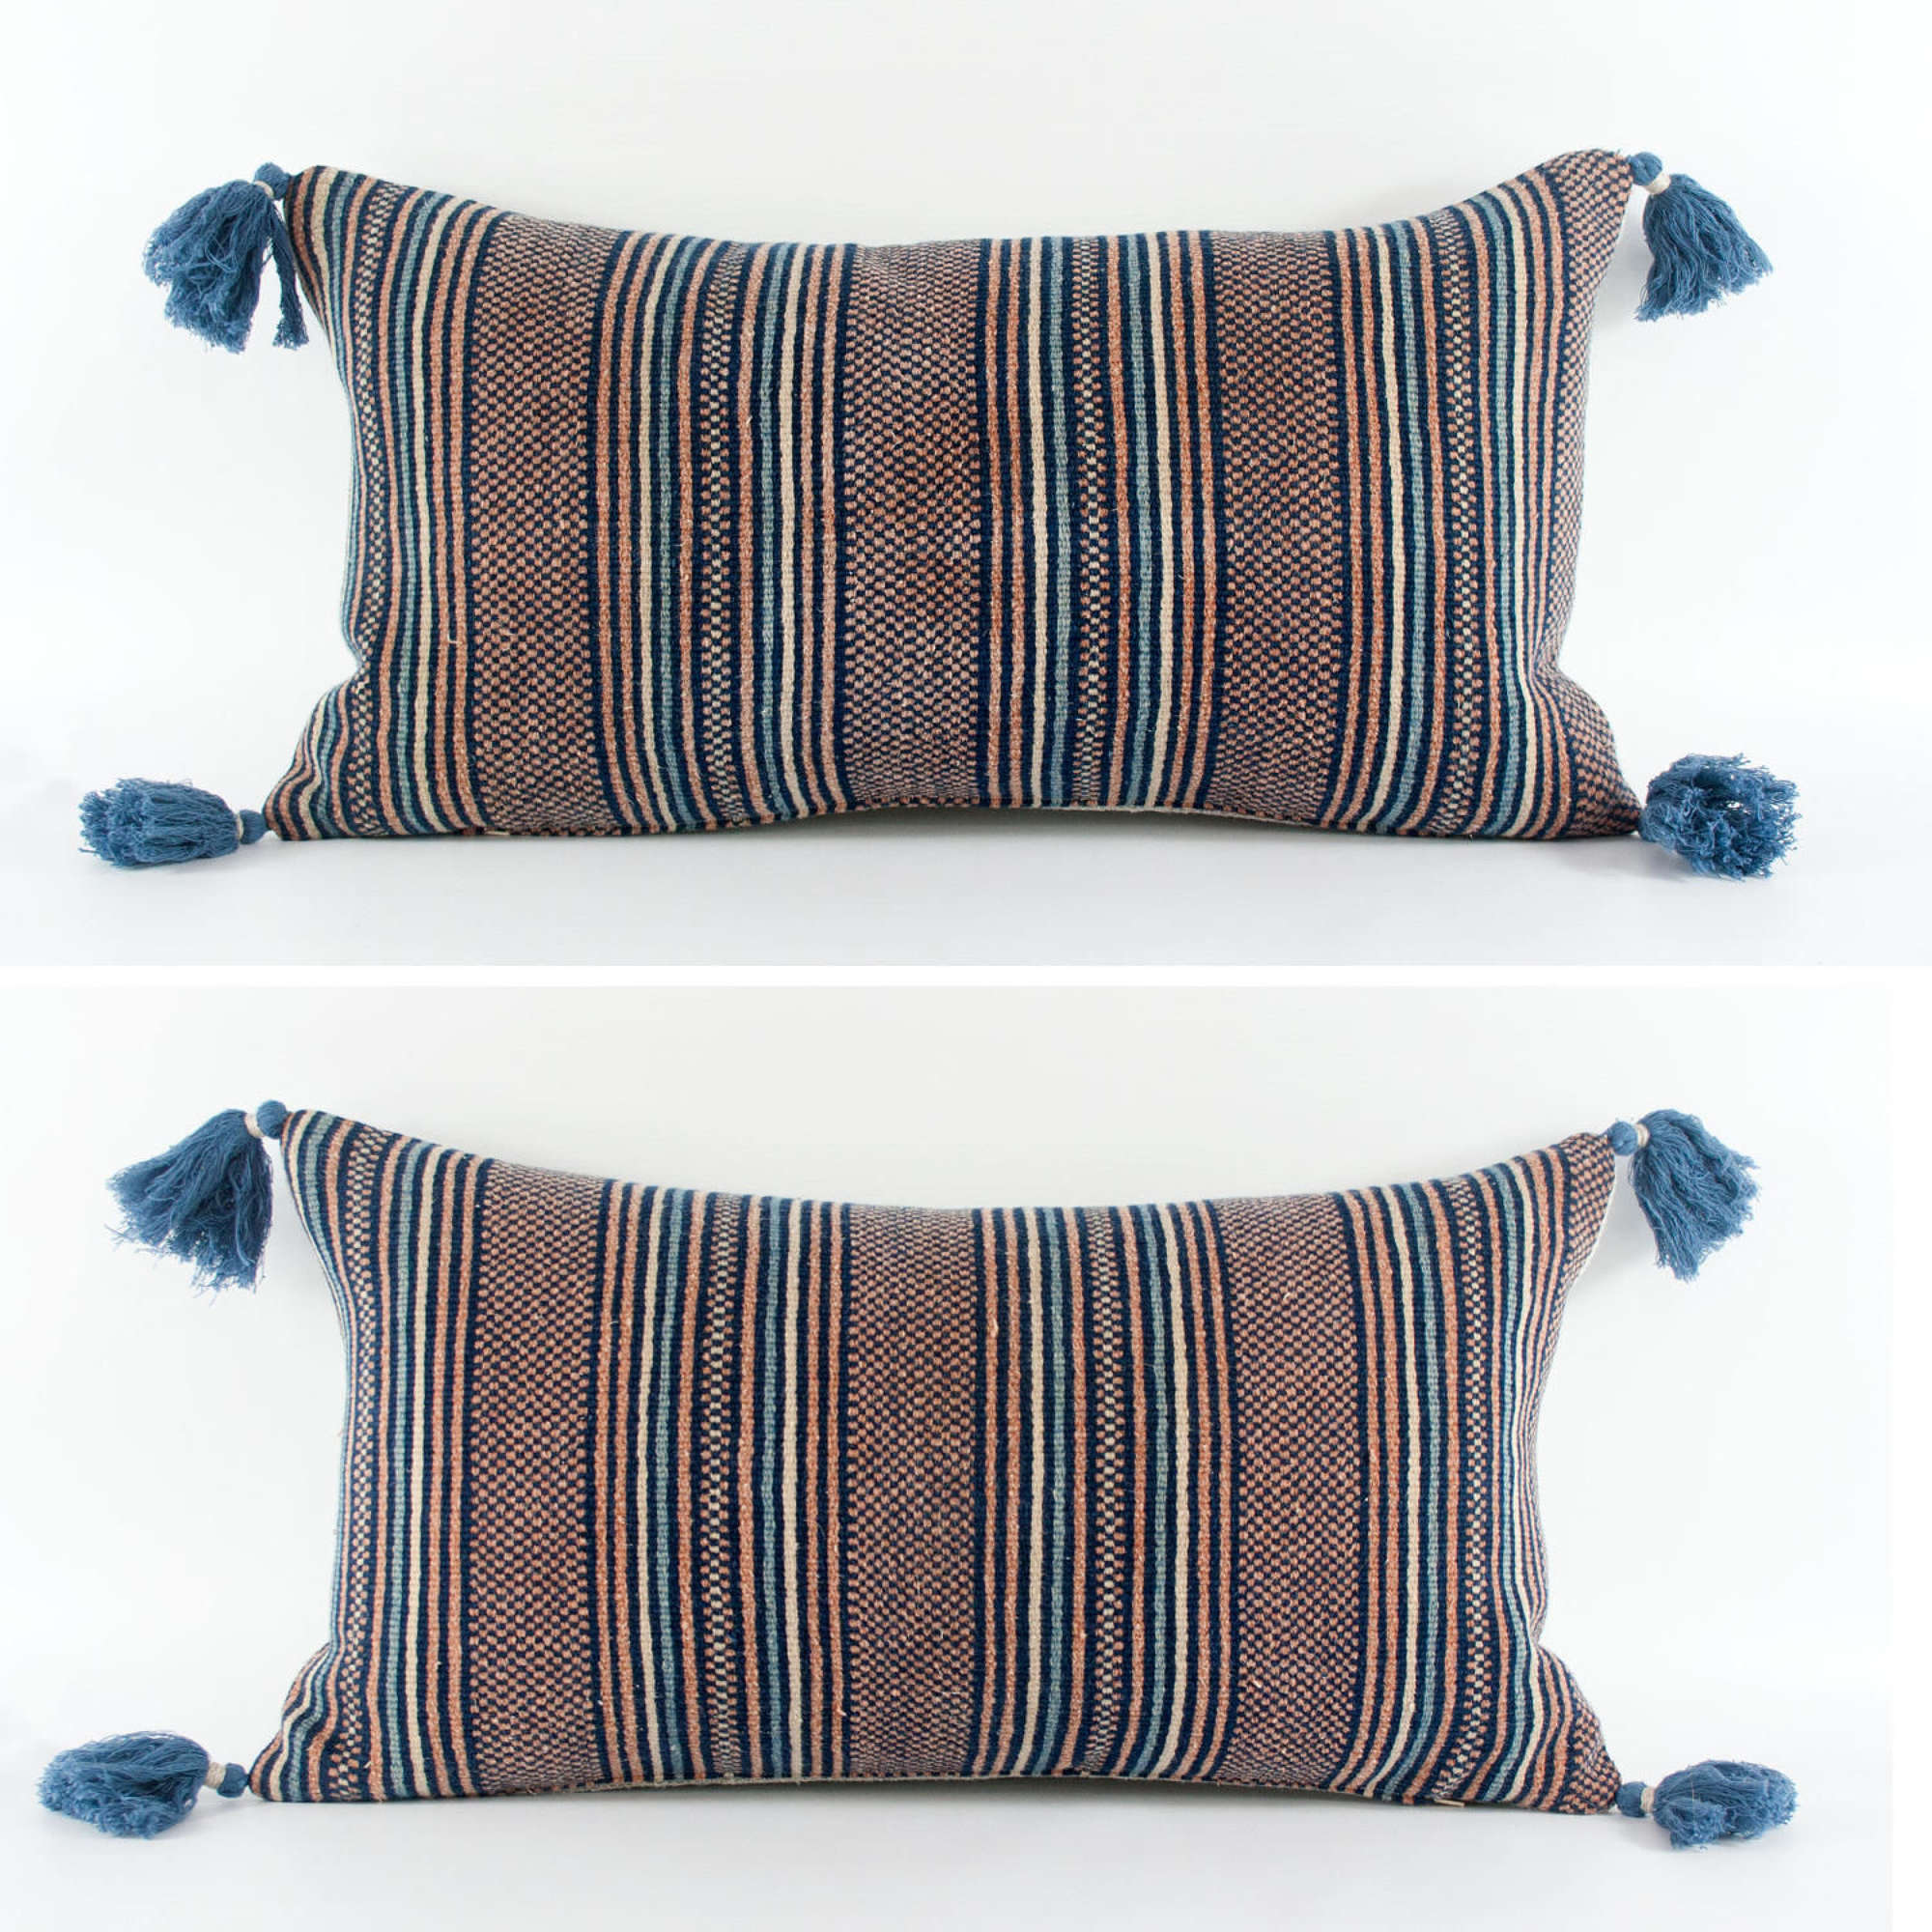 Striped Zhuang Cushions with Tassels